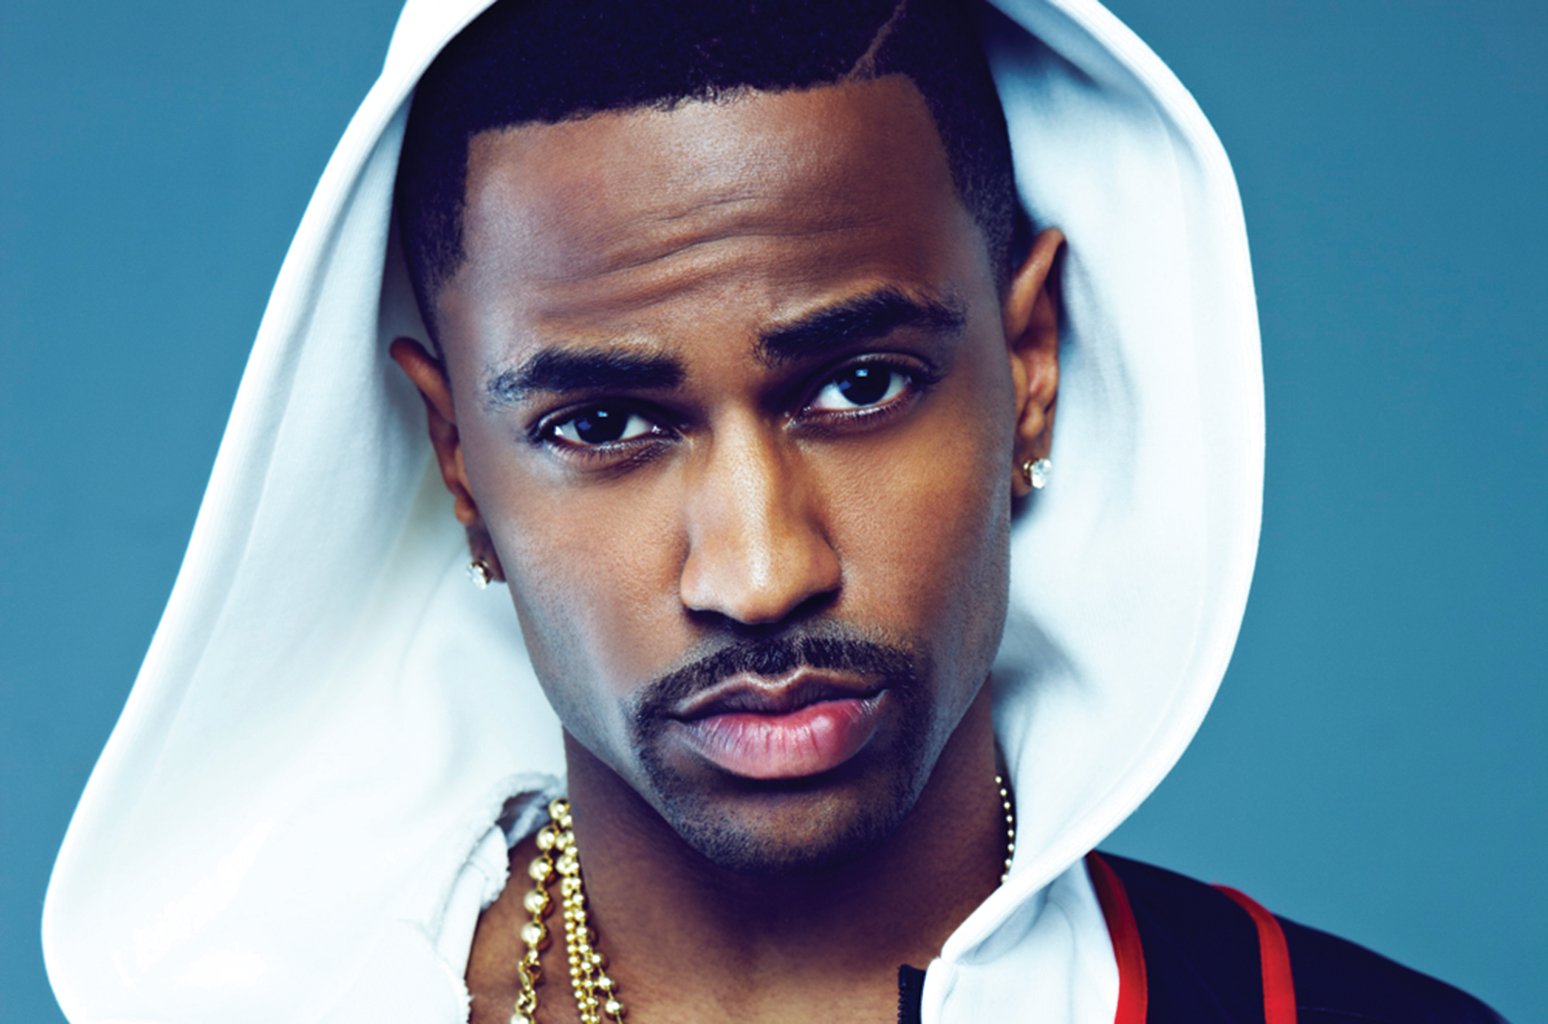 Happy Birthday to the handsome and talented Big Sean. The rapper turns 29 today! 